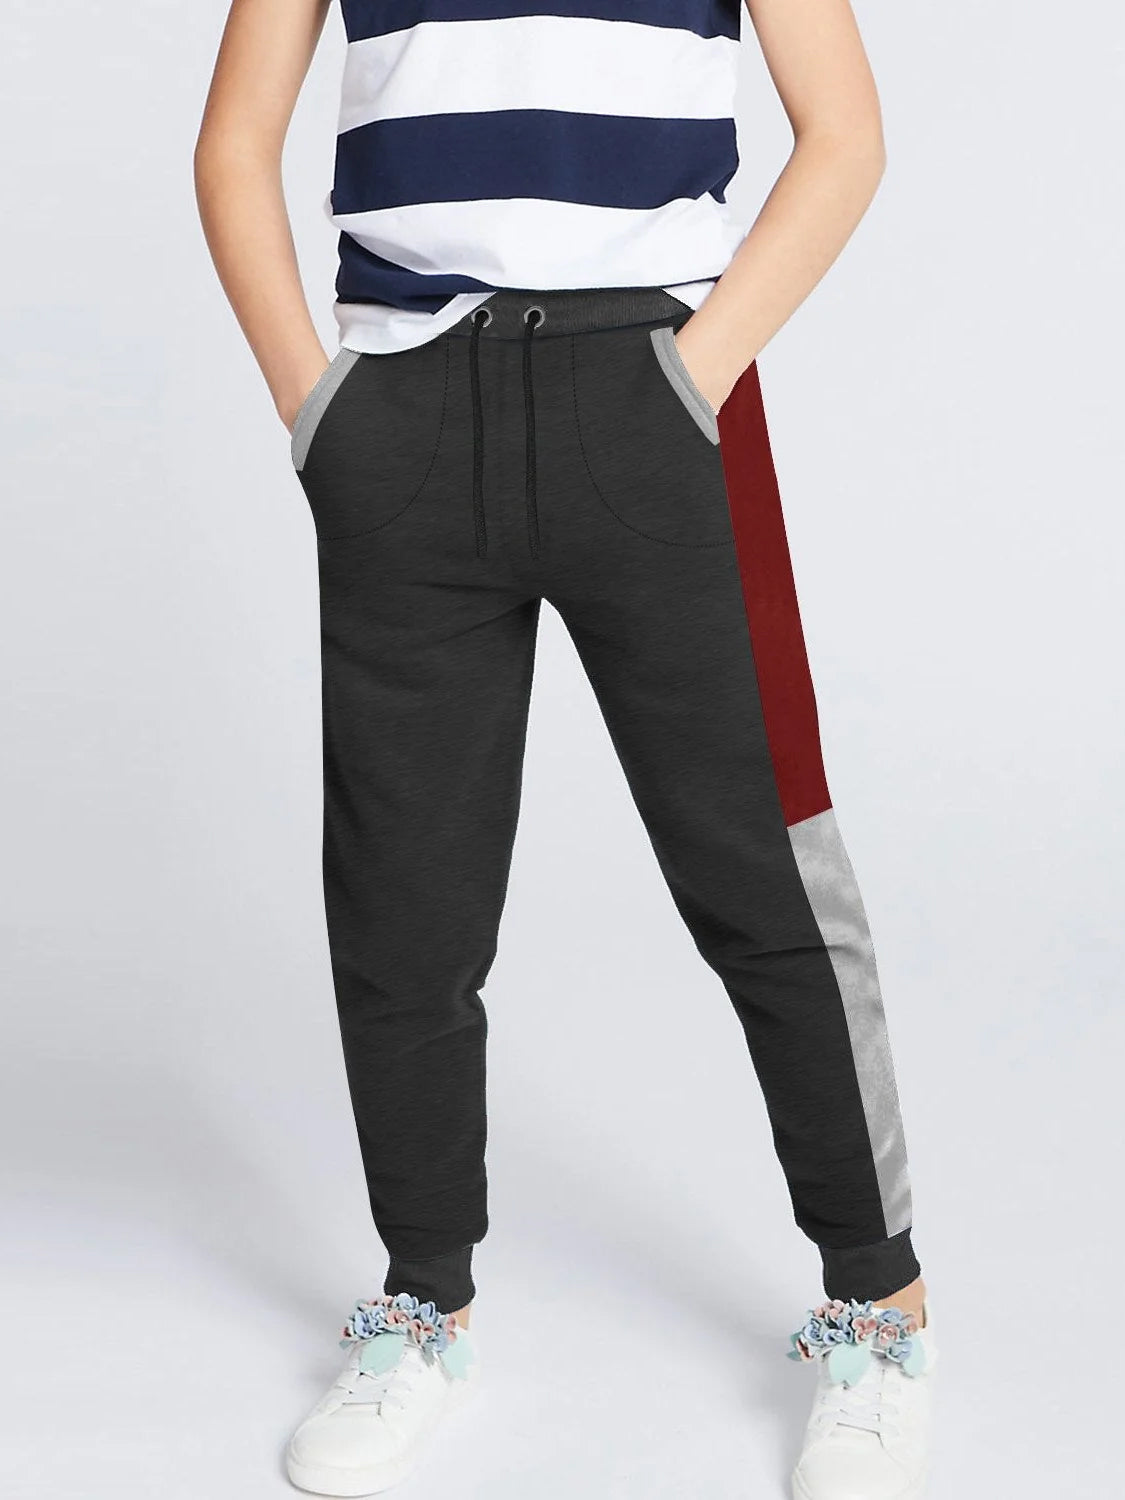 Next Slim Fit Jogger Trouser For Kids-Charcoal with Red & Grey Melange Panels-SP2594